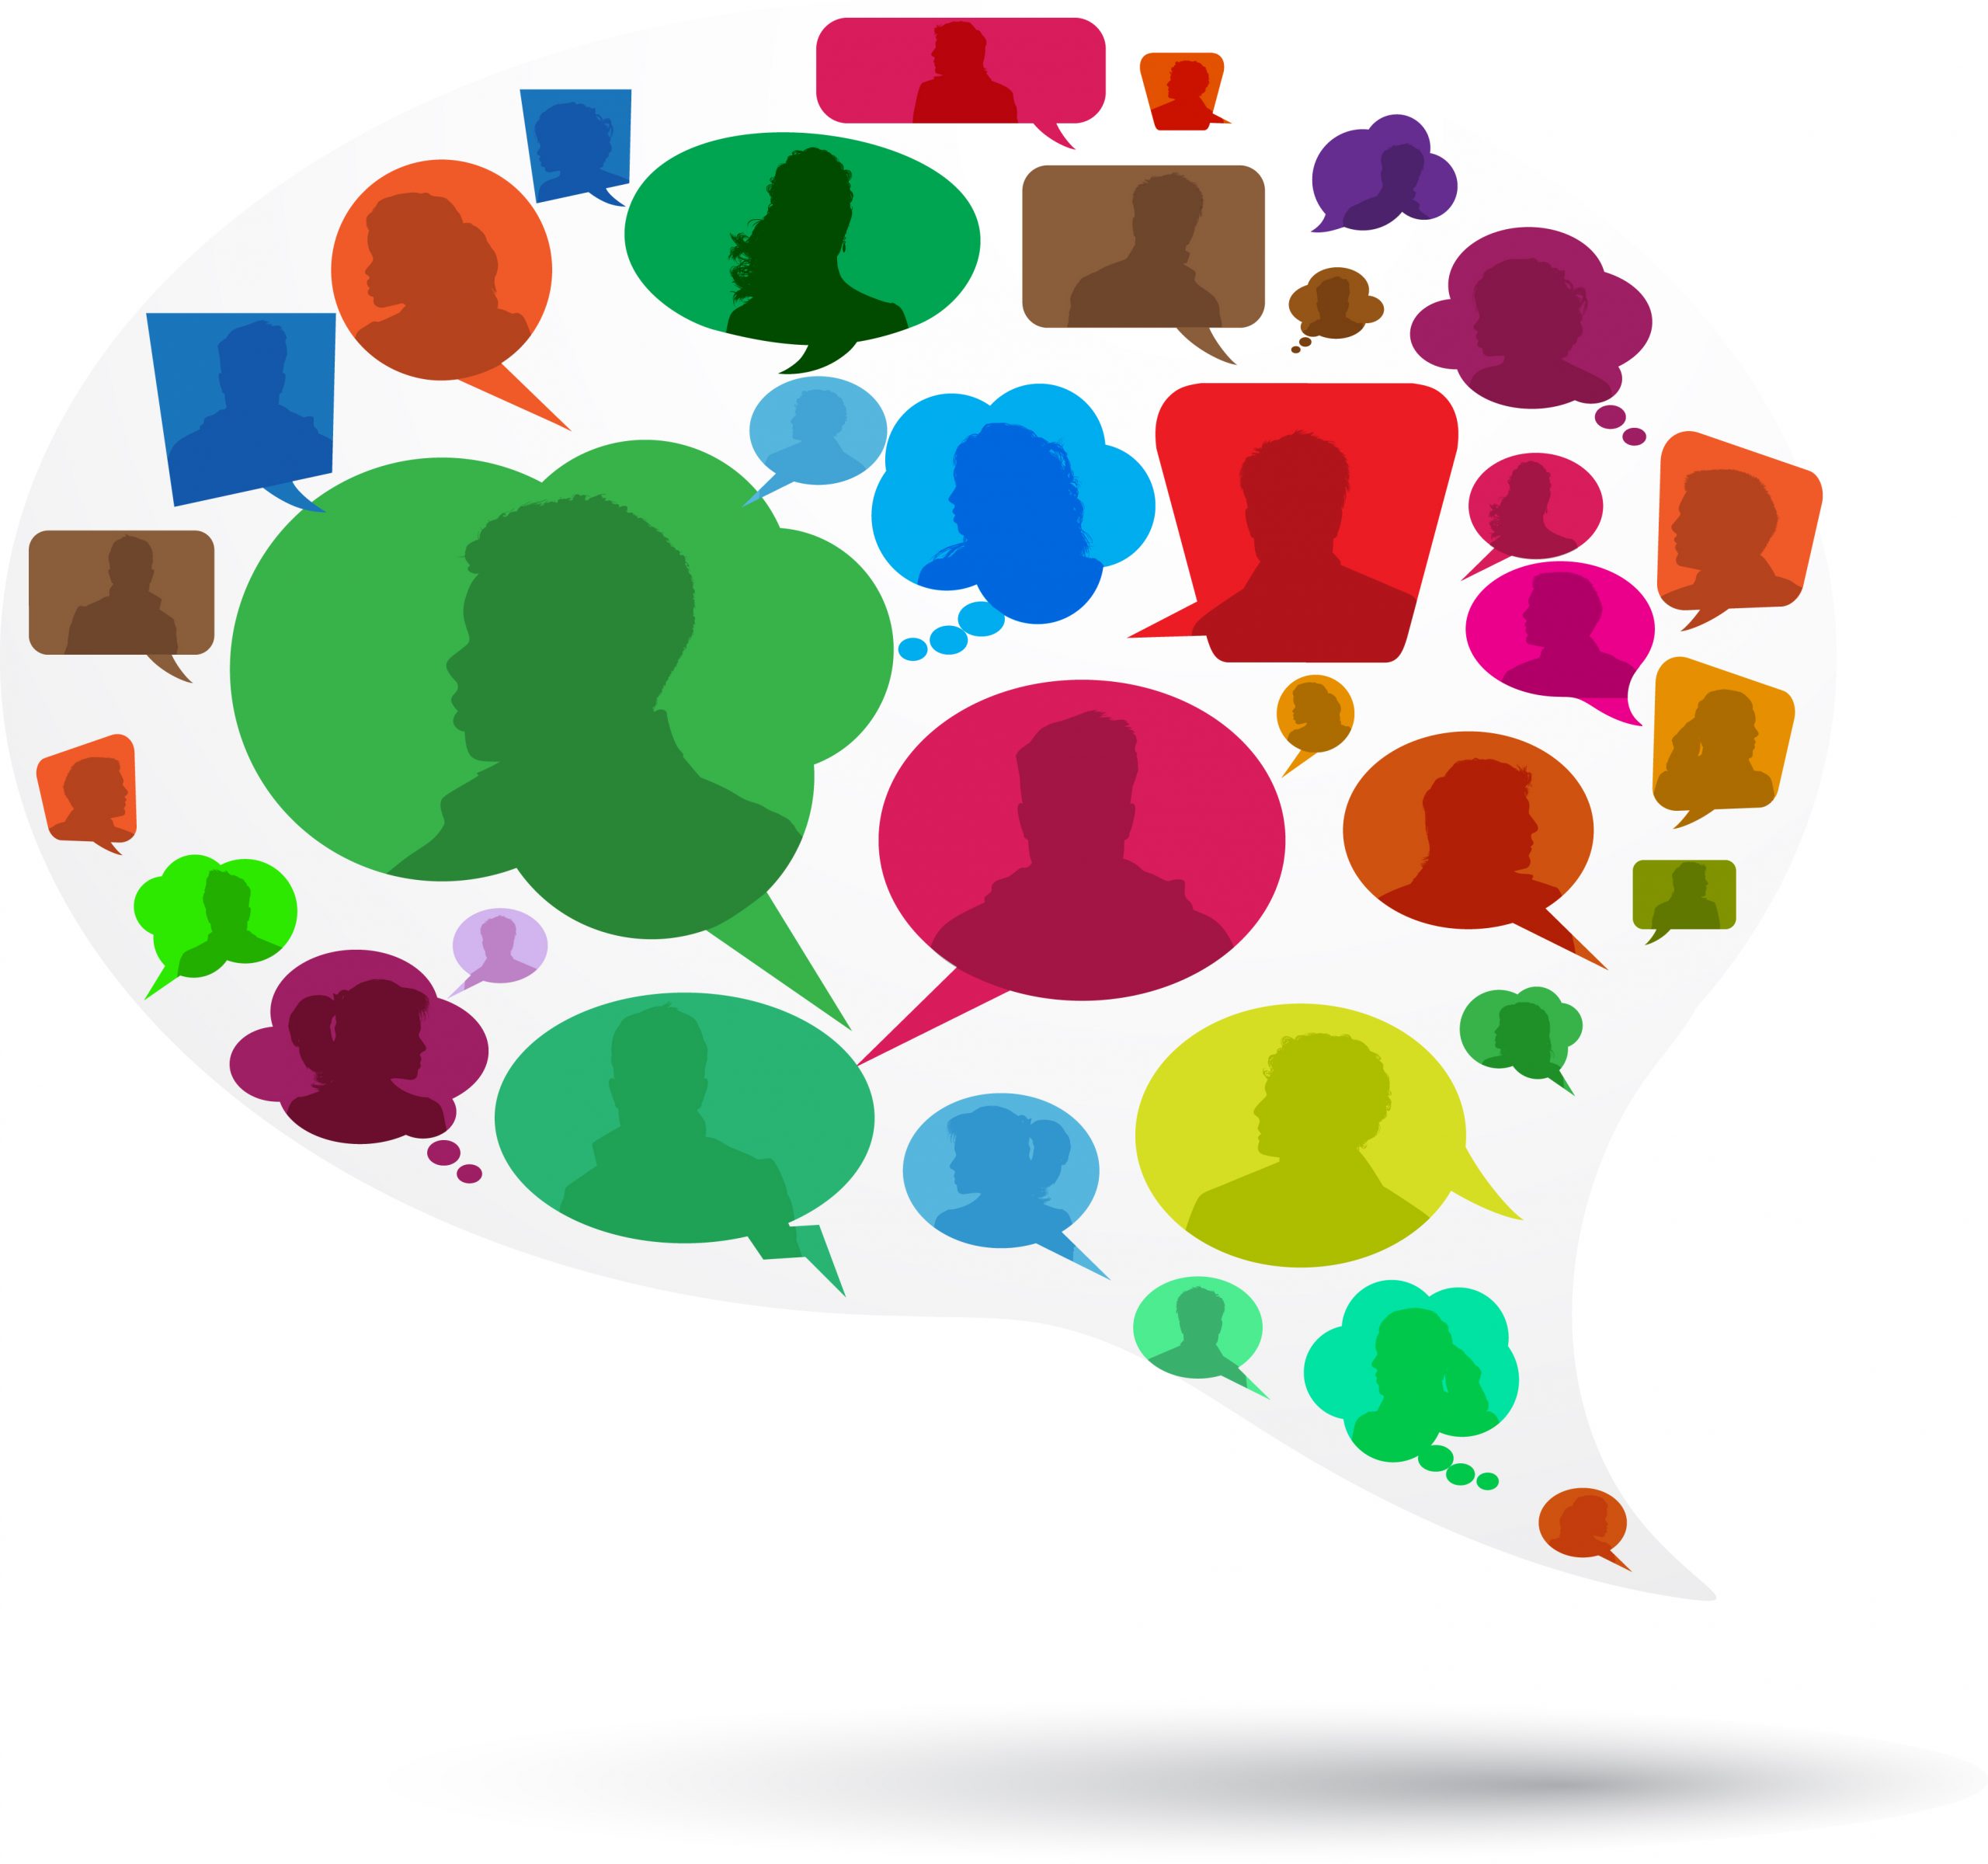 How Your Brand Voice Can Improve Customer Engagement